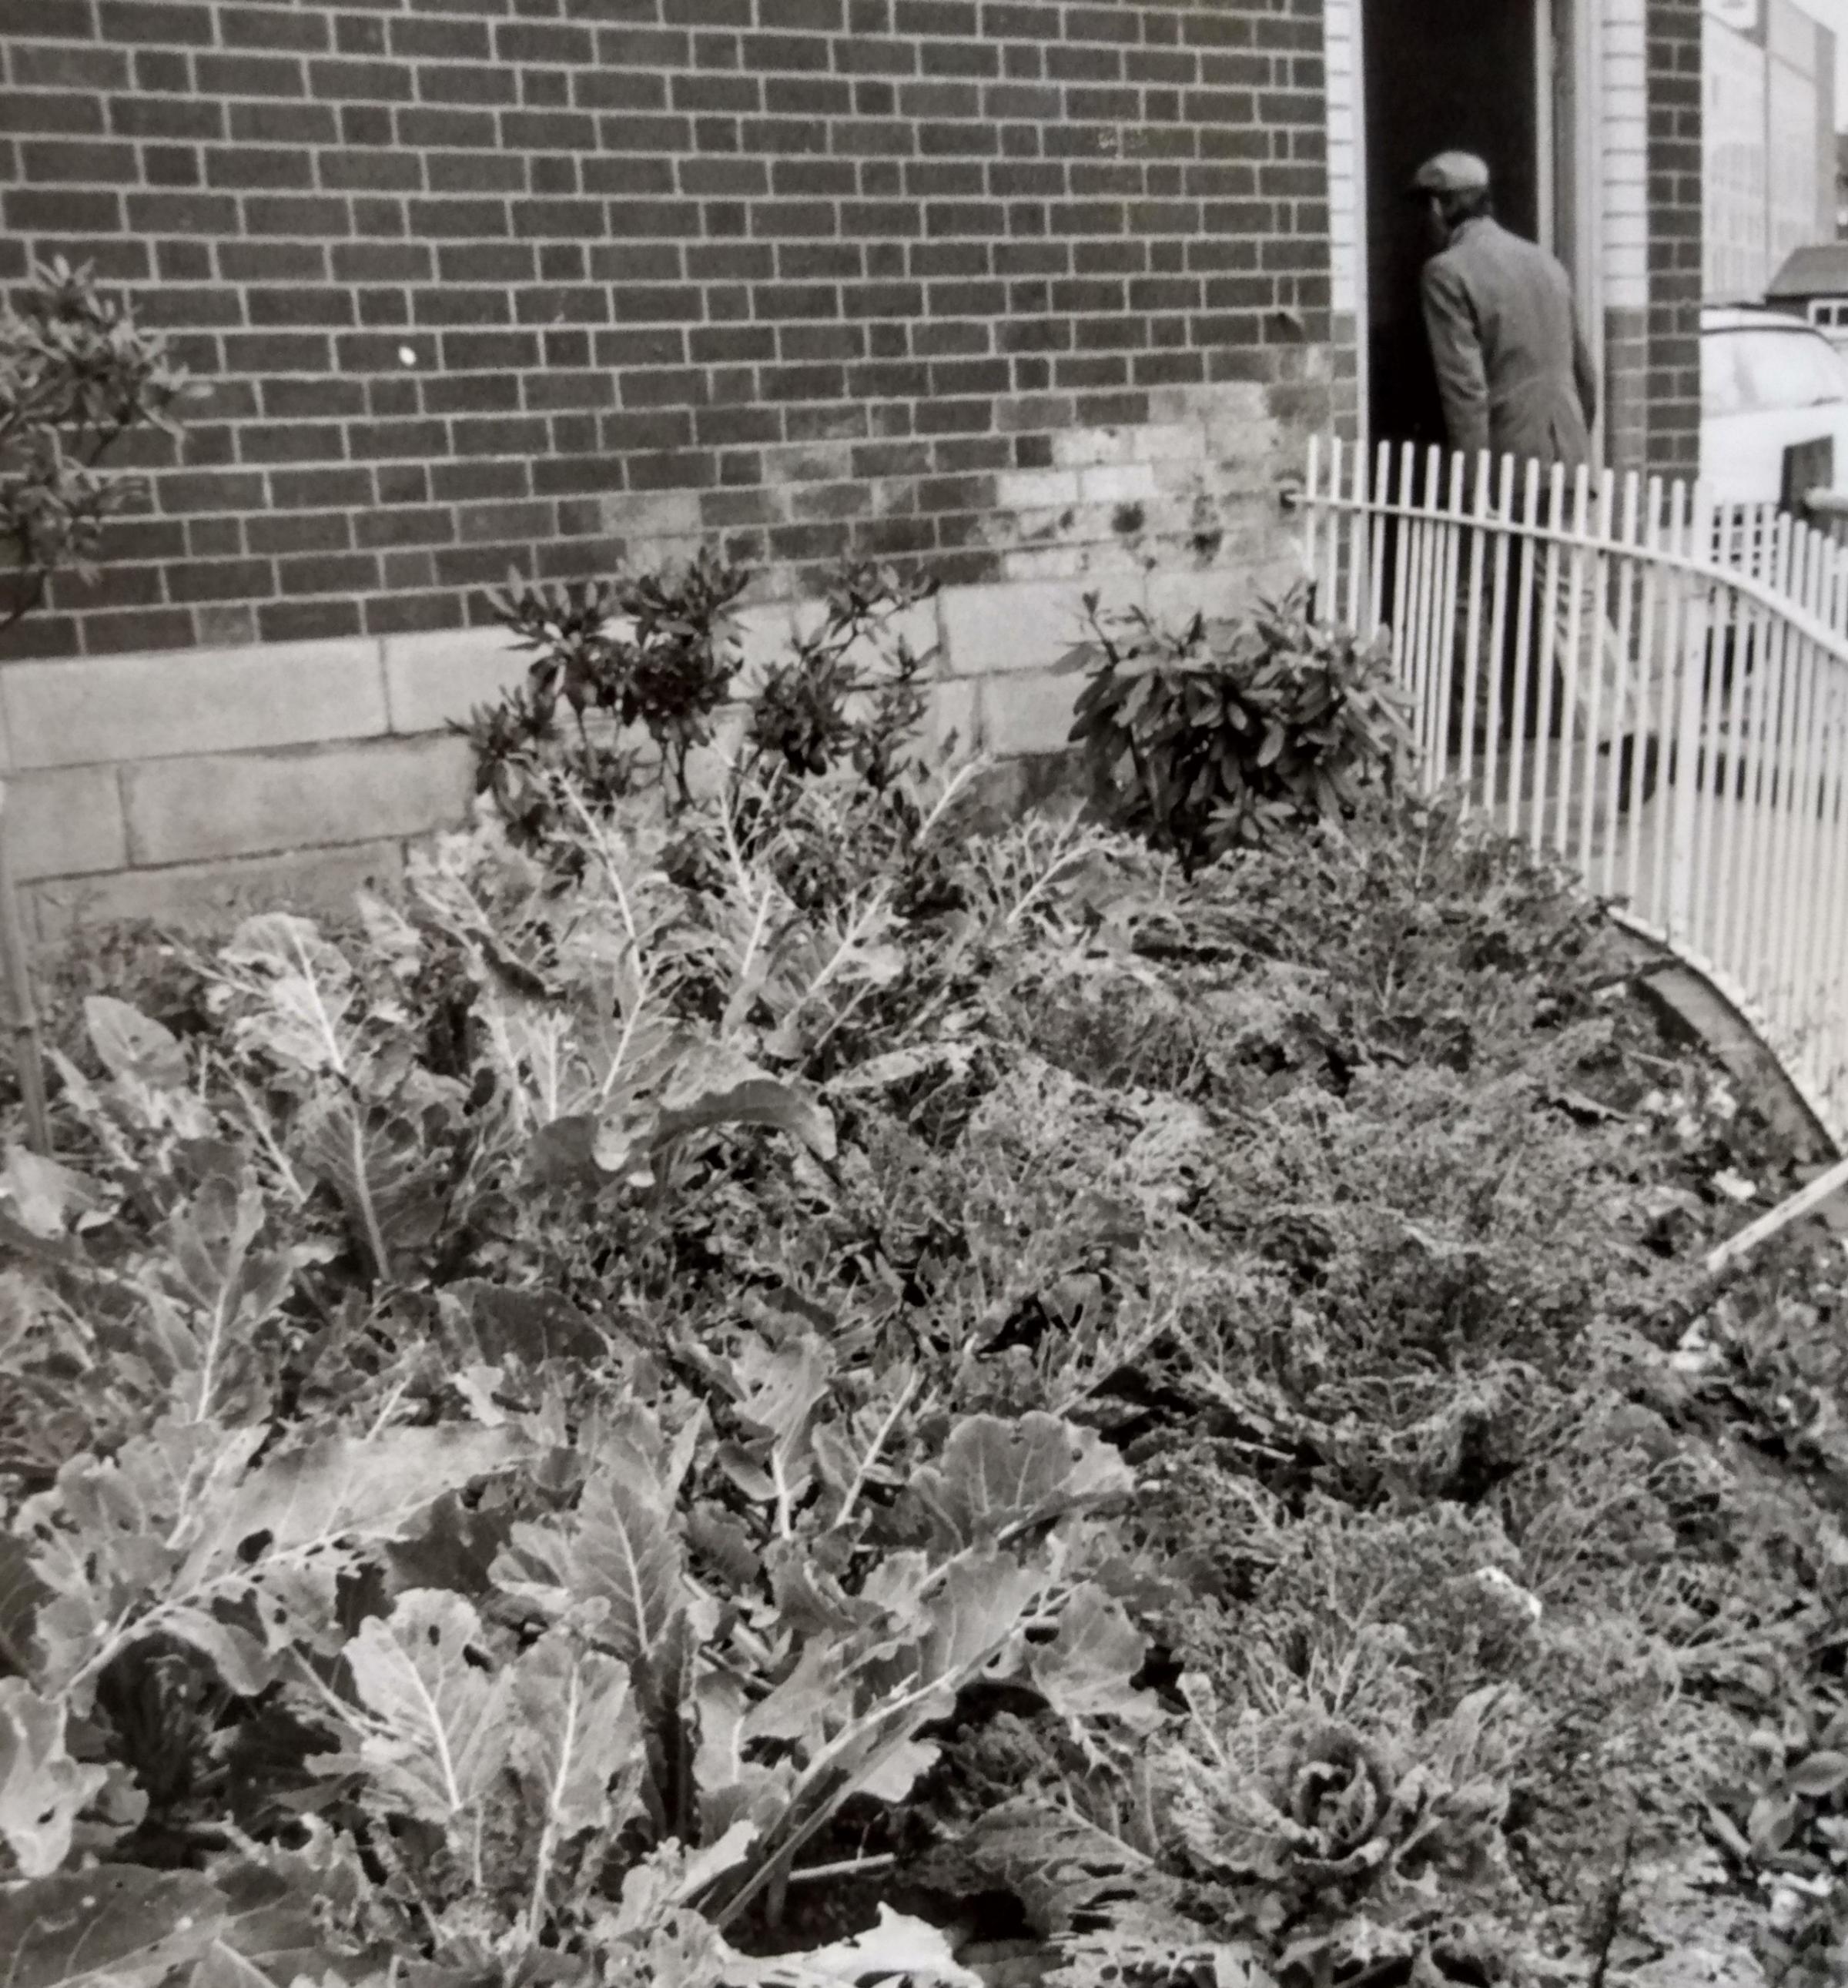 October 1978 and there was a bit of head-scratching as to why a small crop of cabbages had been planted outside the public toilets in the Cornmarket. Best guess at the city council was that some over-eager gardening enthusiast had spotted a space left